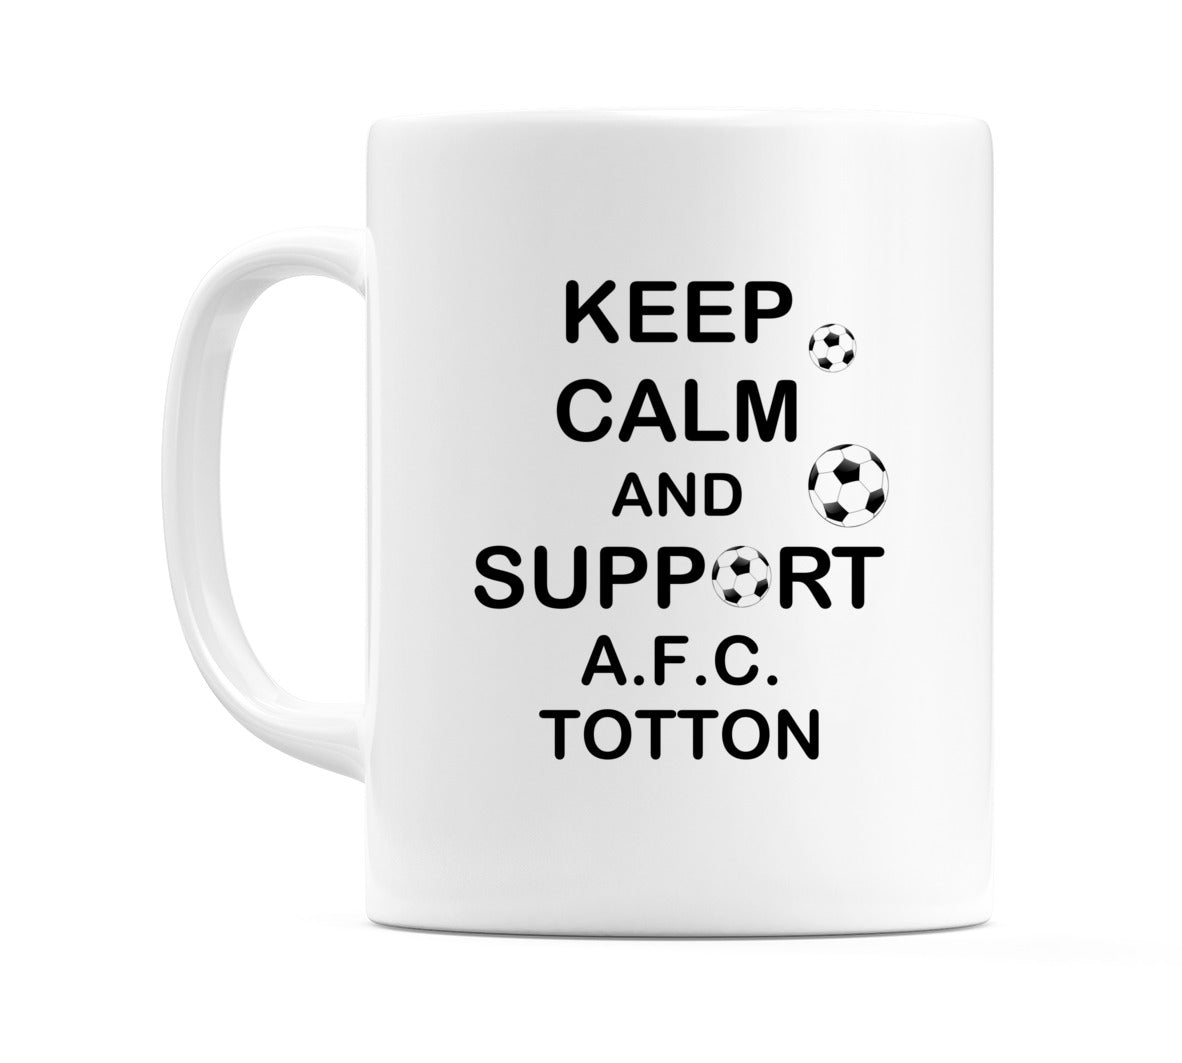 Keep Calm And Support A.F.C. Totton Mug